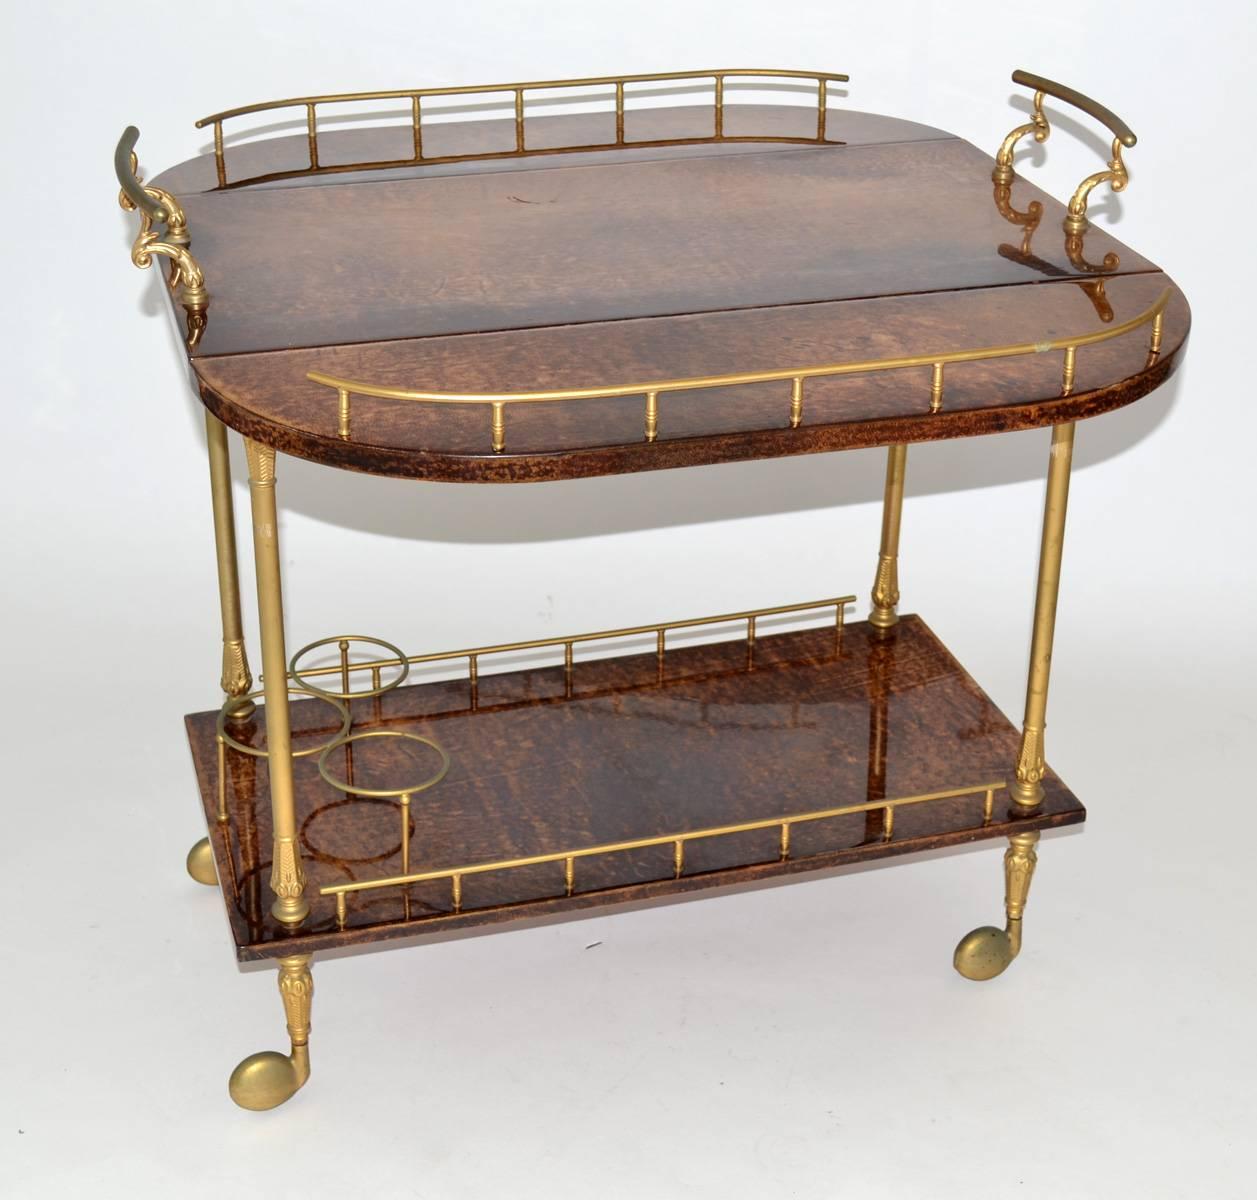 Aldo Tura goatskin drop-leaf bar or tea cart in chocolate brown parchment with brass hardware. Small wheeled version. Professional repair to bottom shelf. Re lacquered in a semi gloss clear coat.